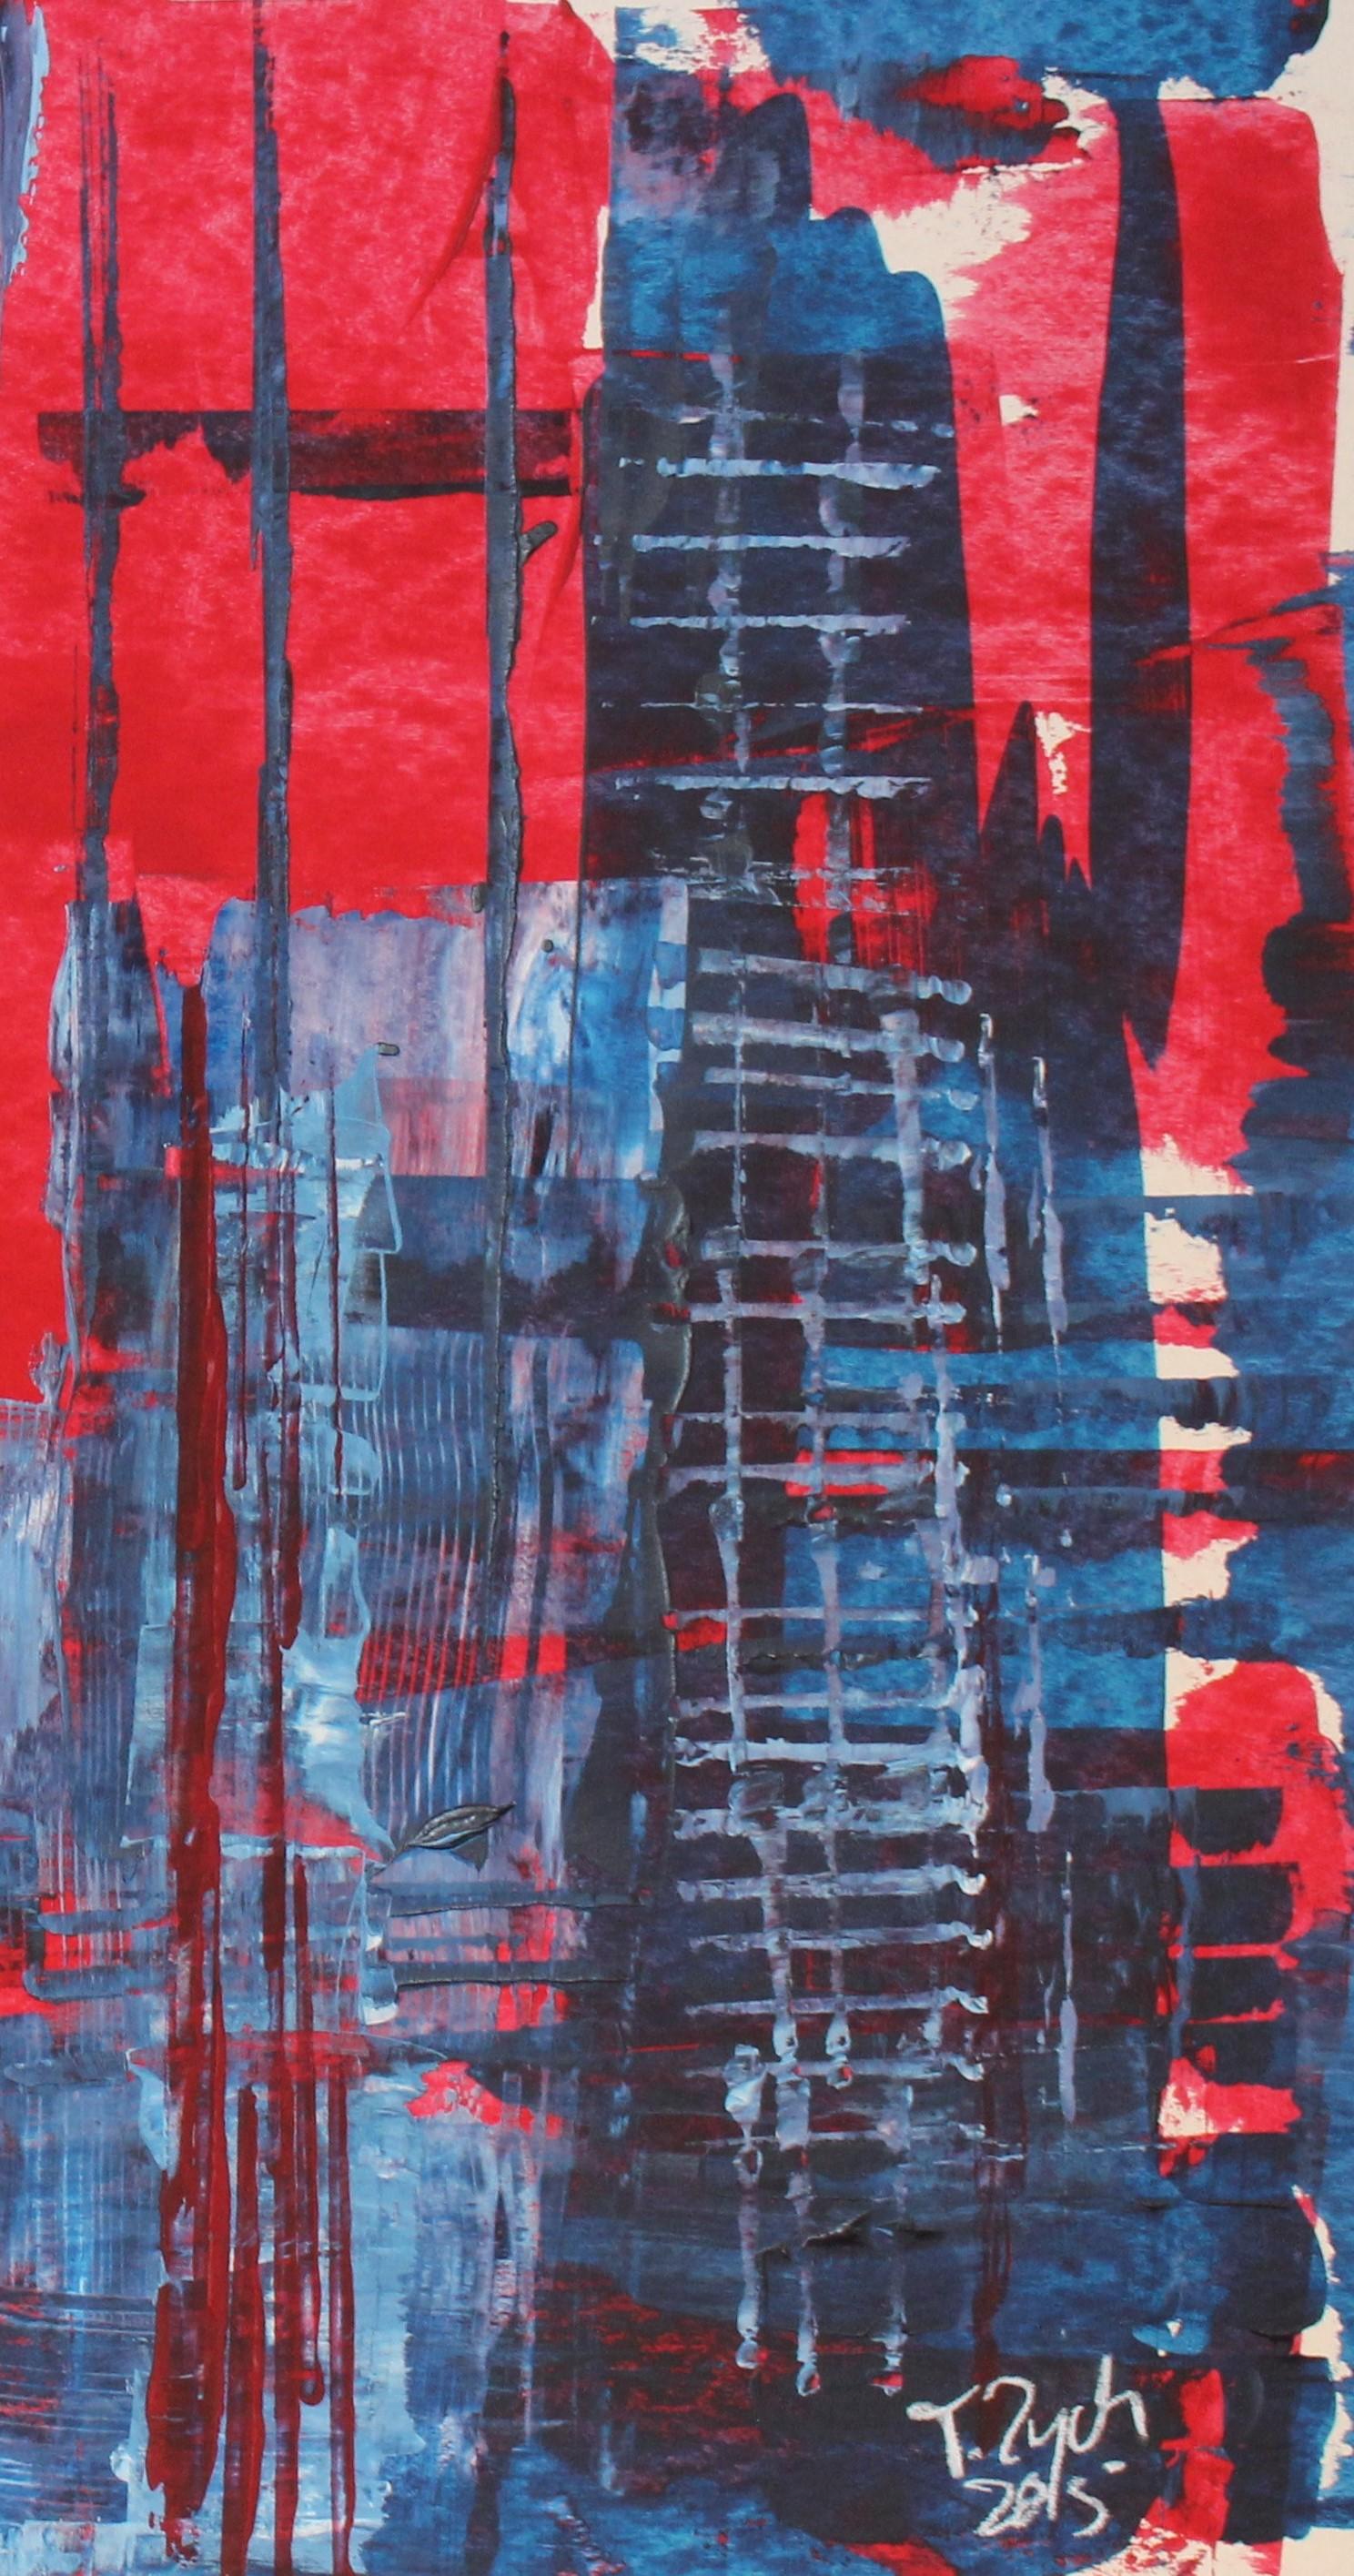 Kuala Lumpur / Acrylic on cardboard / 70 x 100 cm - Abstract Expressionist Painting by Tadeusz Zych